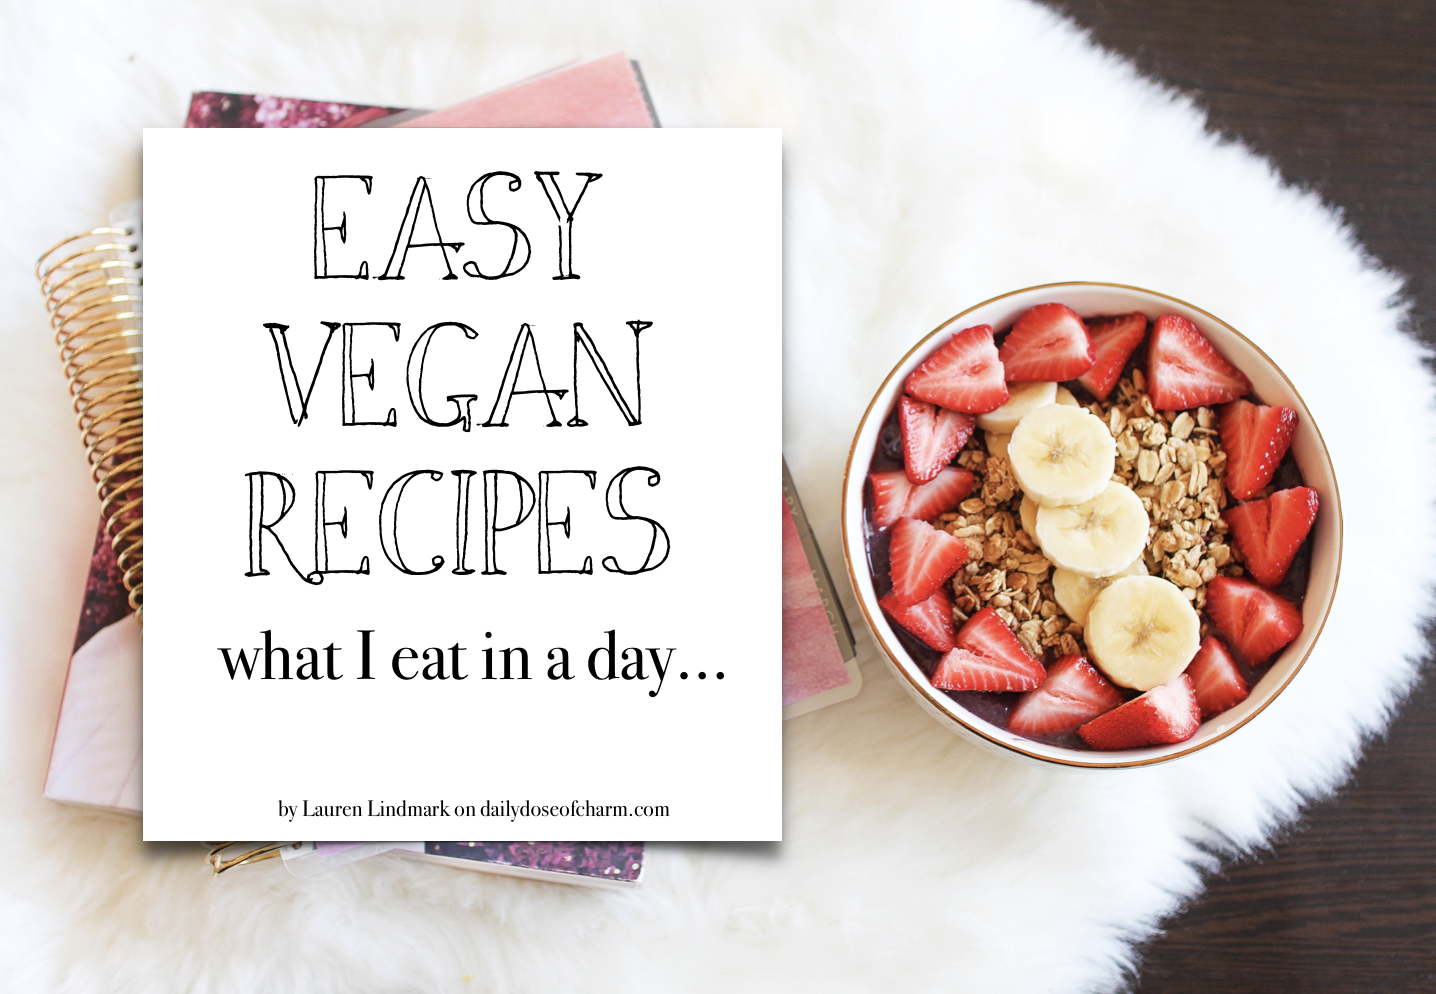 Vegan Recipes! What I eat in a day healthy and plant based! Acai Bowl, Black bean and corn rice, peanut butter apples, and potatoes with Sriracha aioli! By Lauren Lindmark on daily dose of charm dailydoseofcharm.com